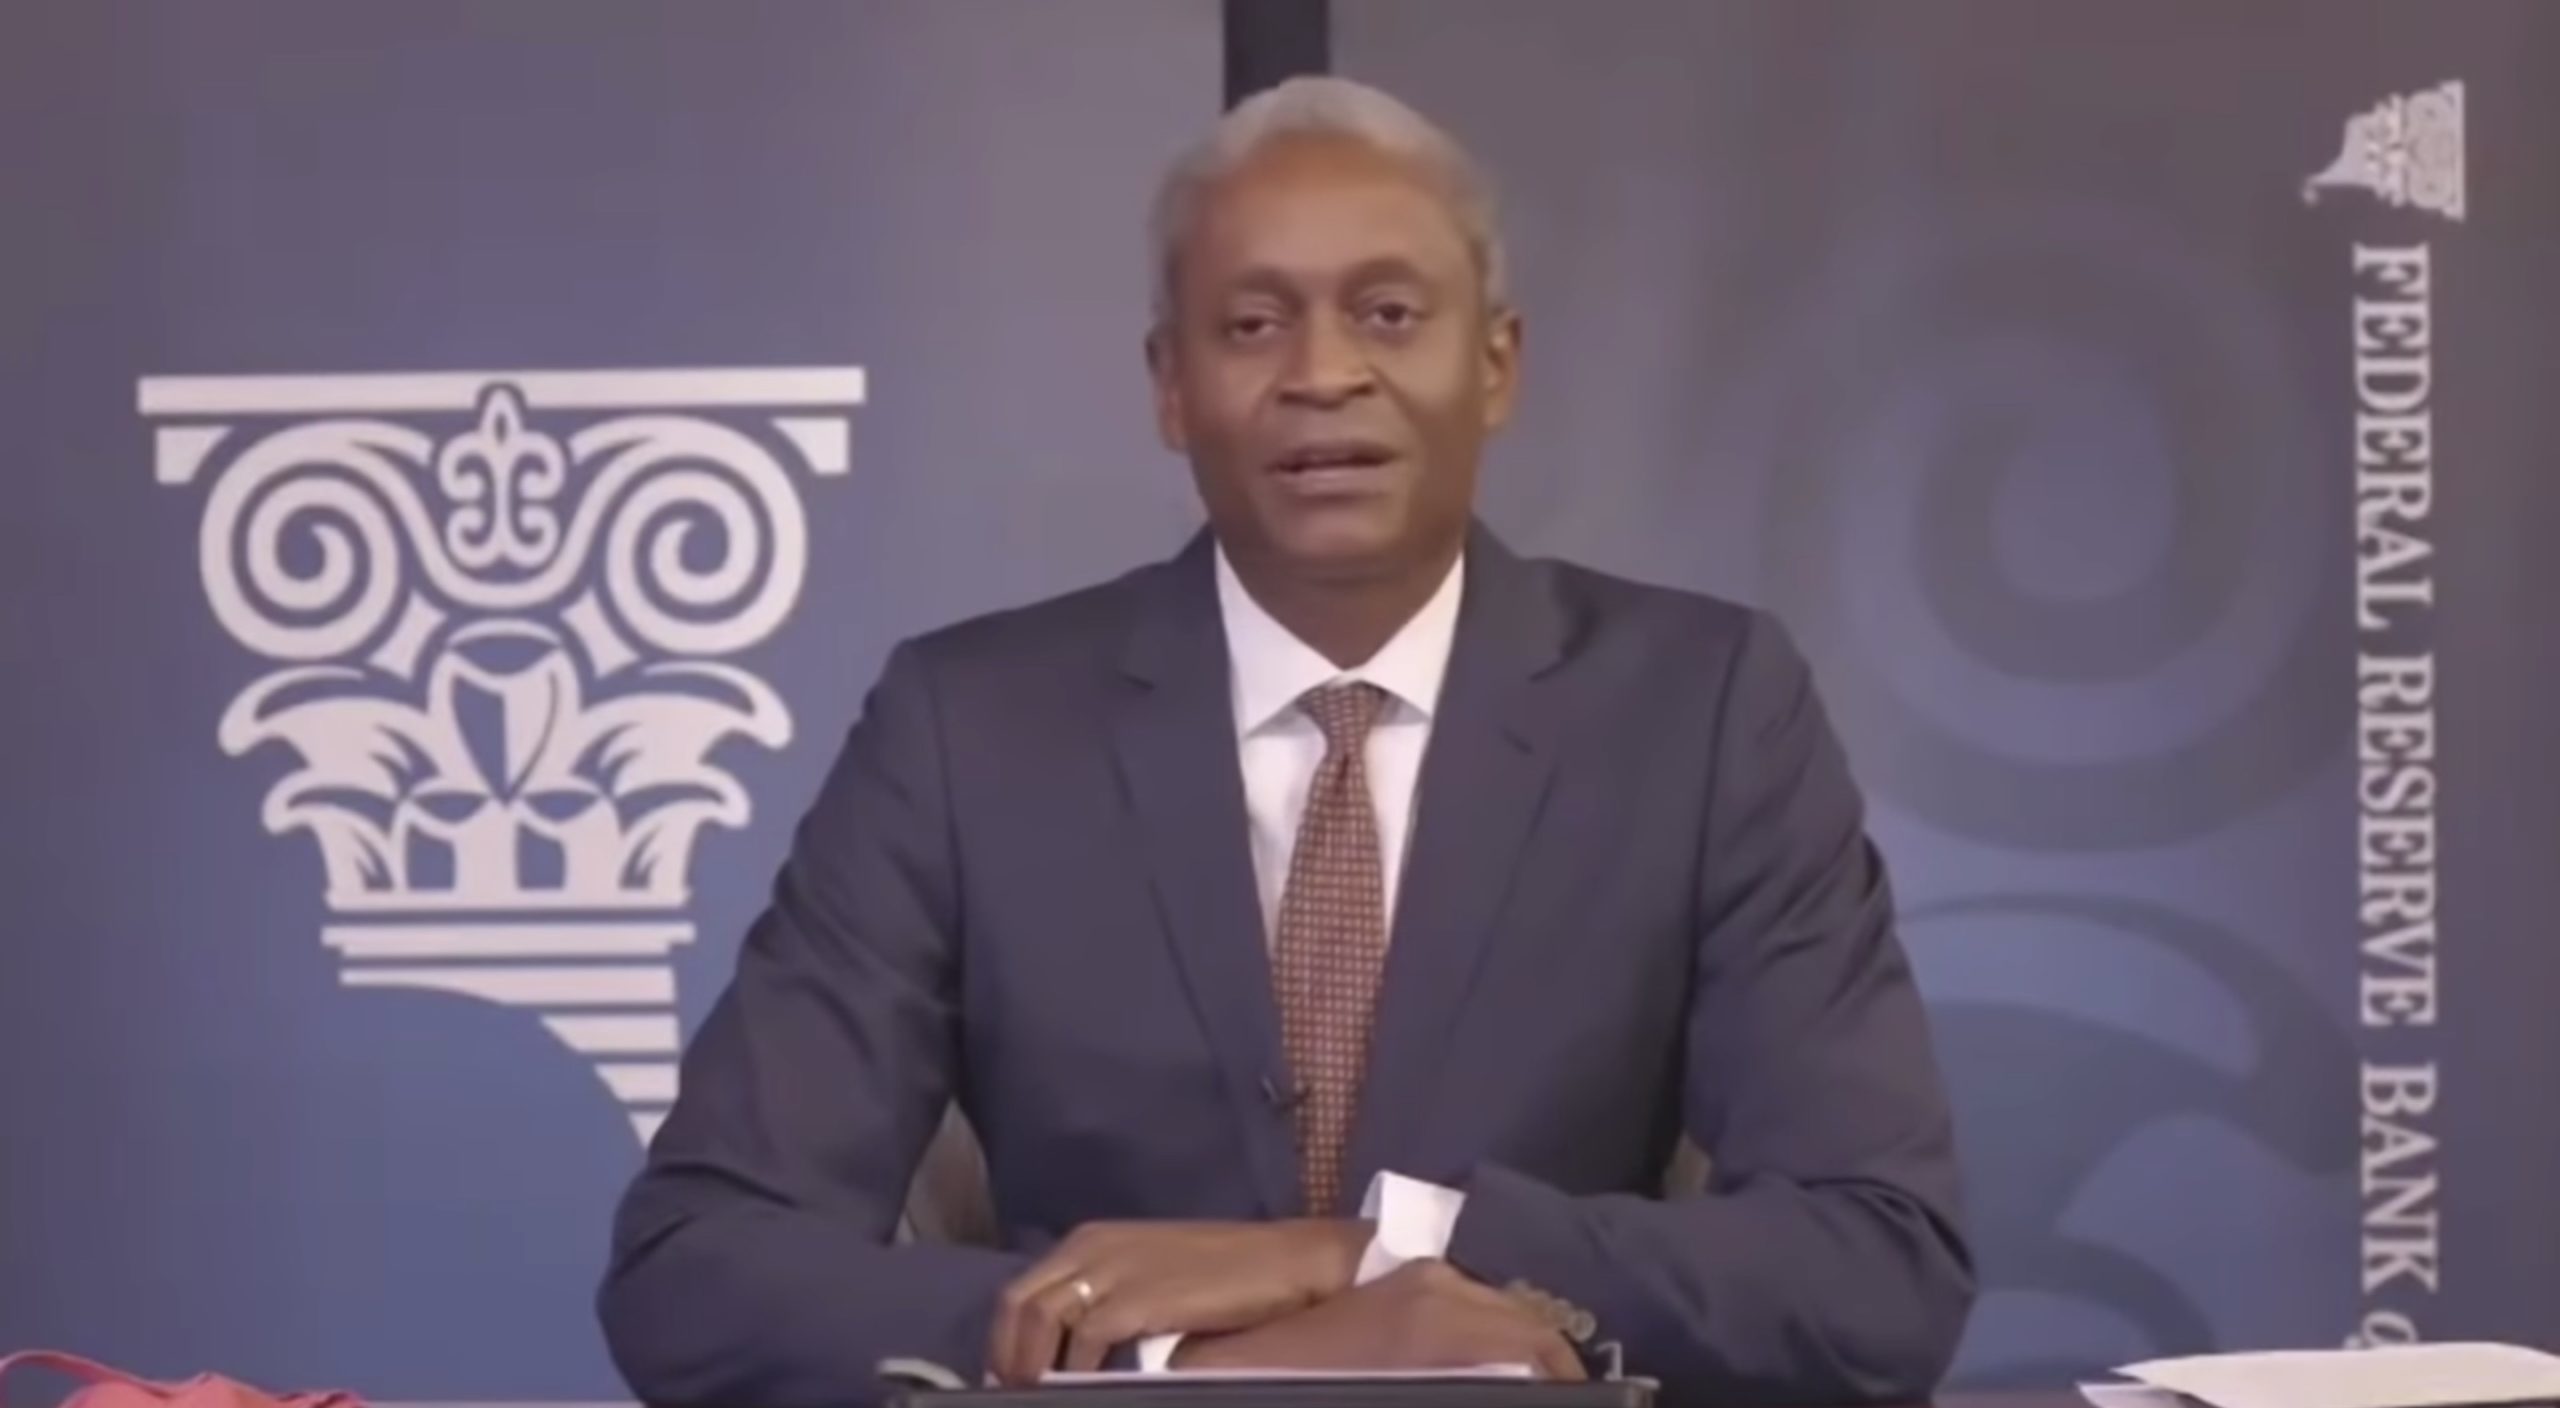 Atlanta Fed President Raphael Bostic introduces the "Racism and the Economy" kickoff event on Oct. 7. (Atlanta Fed/Video screenshot/YouTube)